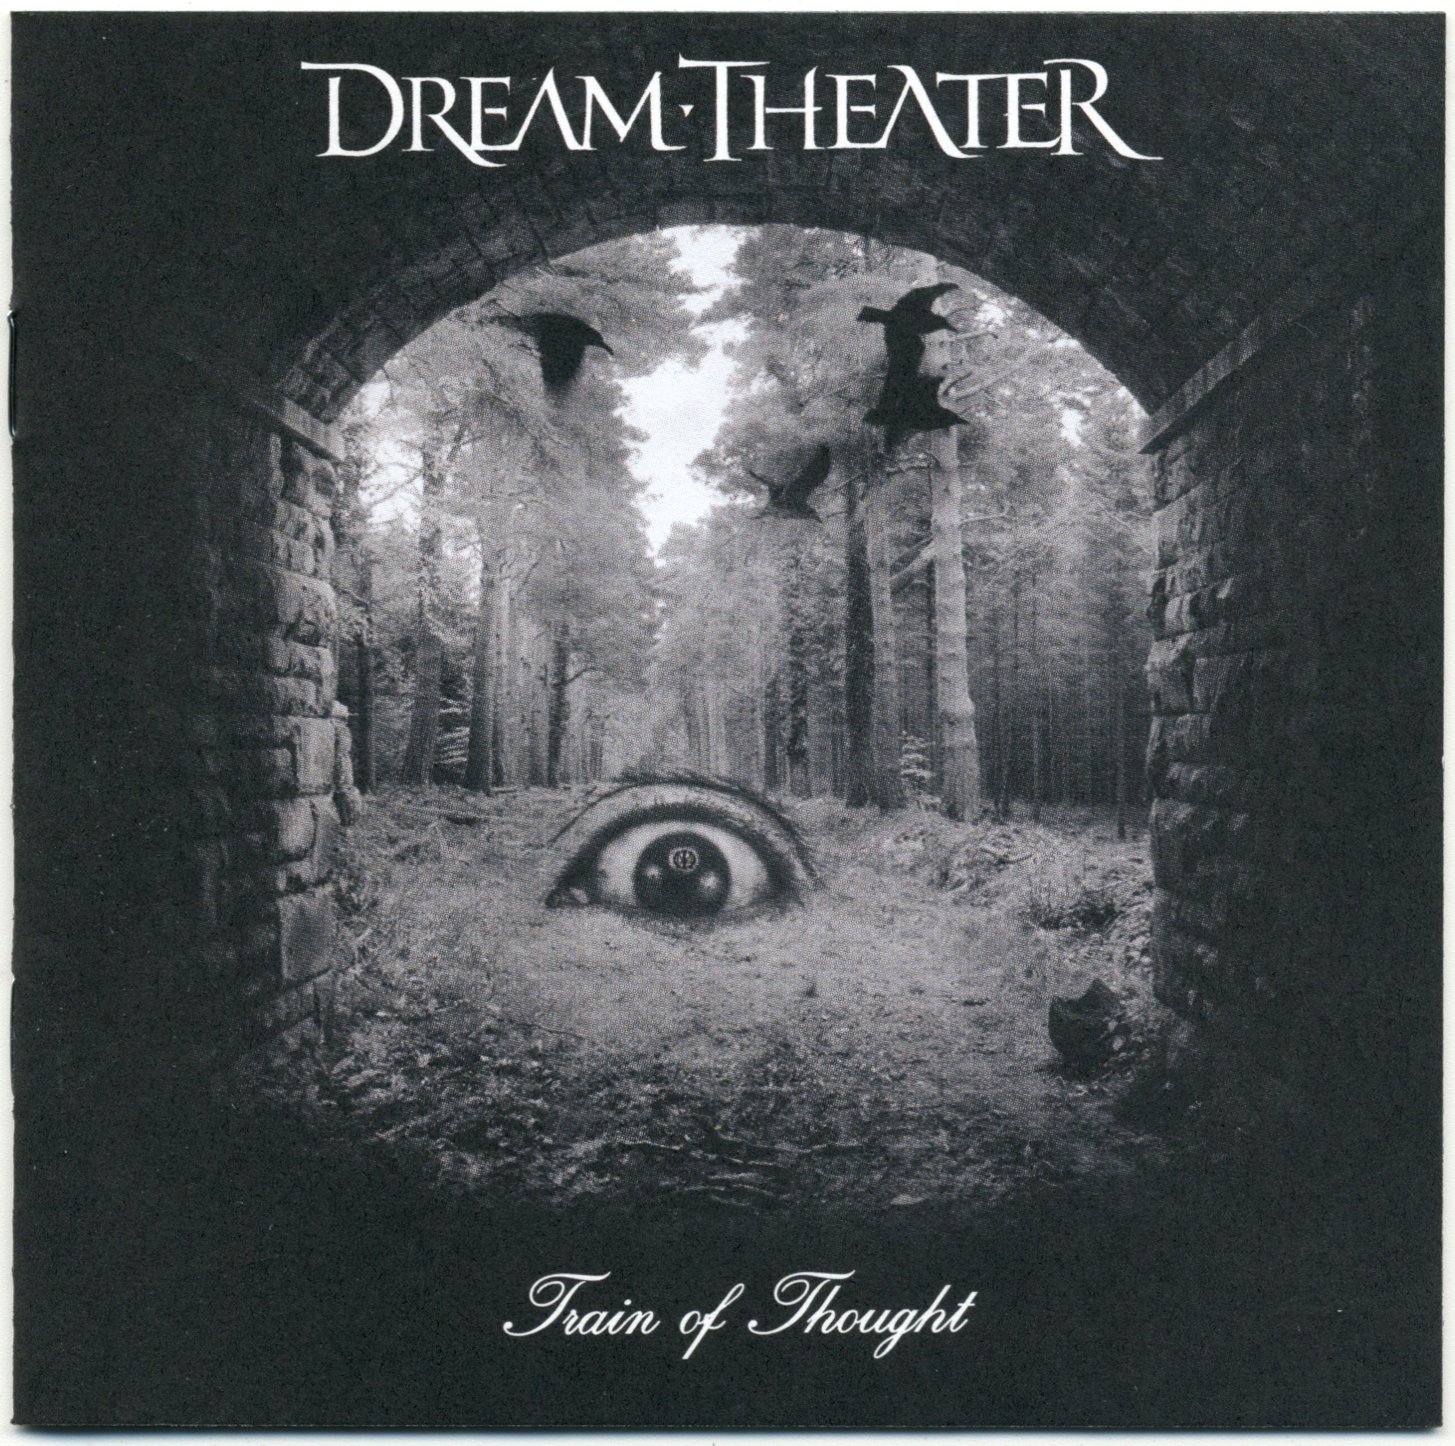 Альбом theatre dreams. Dream Theater - Train of thought (2003). Dream Theater albums. Dream Theater обложки альбомов. Dream Theater Train of thought.